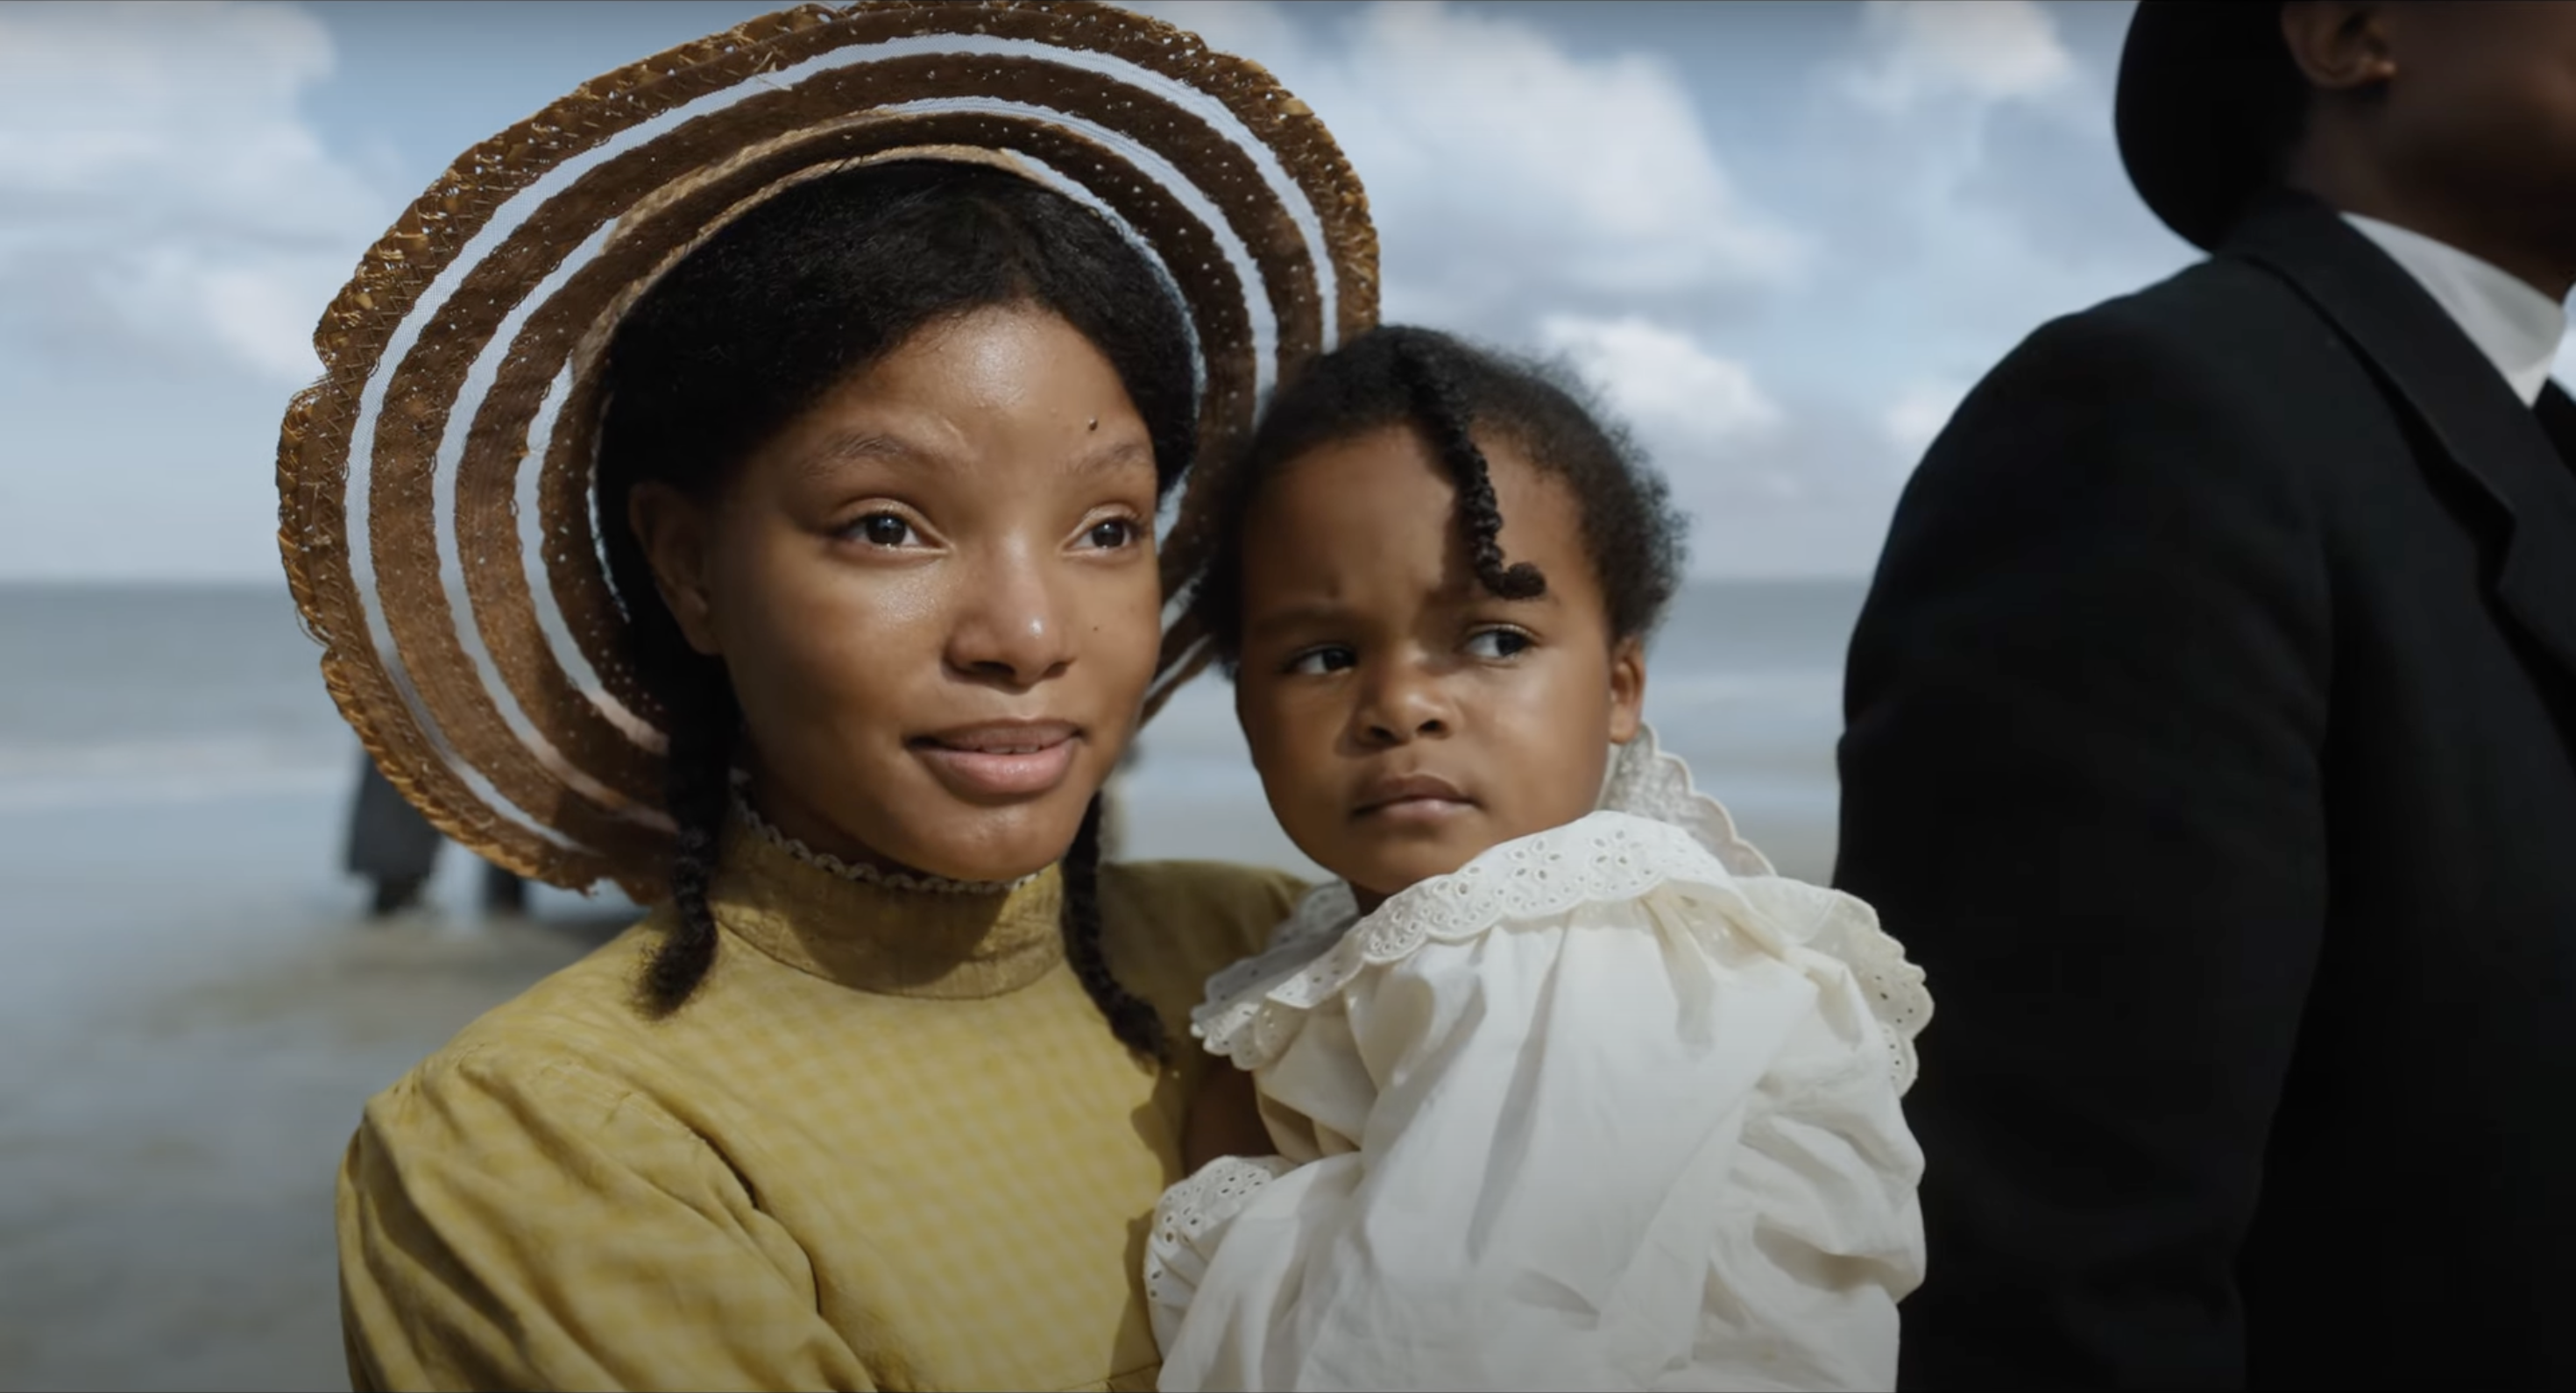 halle bailey in a still from the color purple movie holding a young child